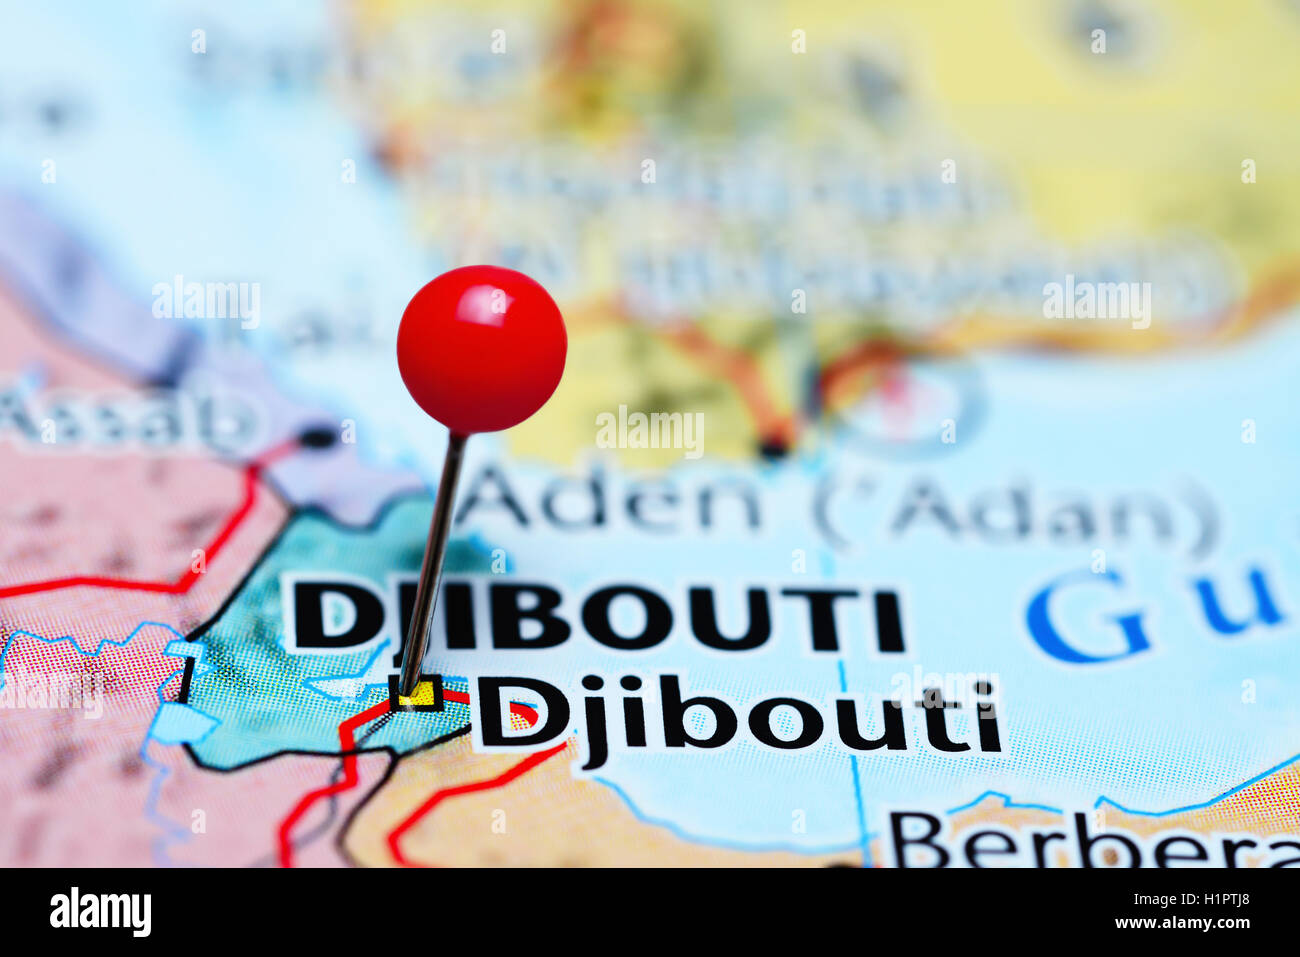 Djibouti pinned on a map of Asia Stock Photo